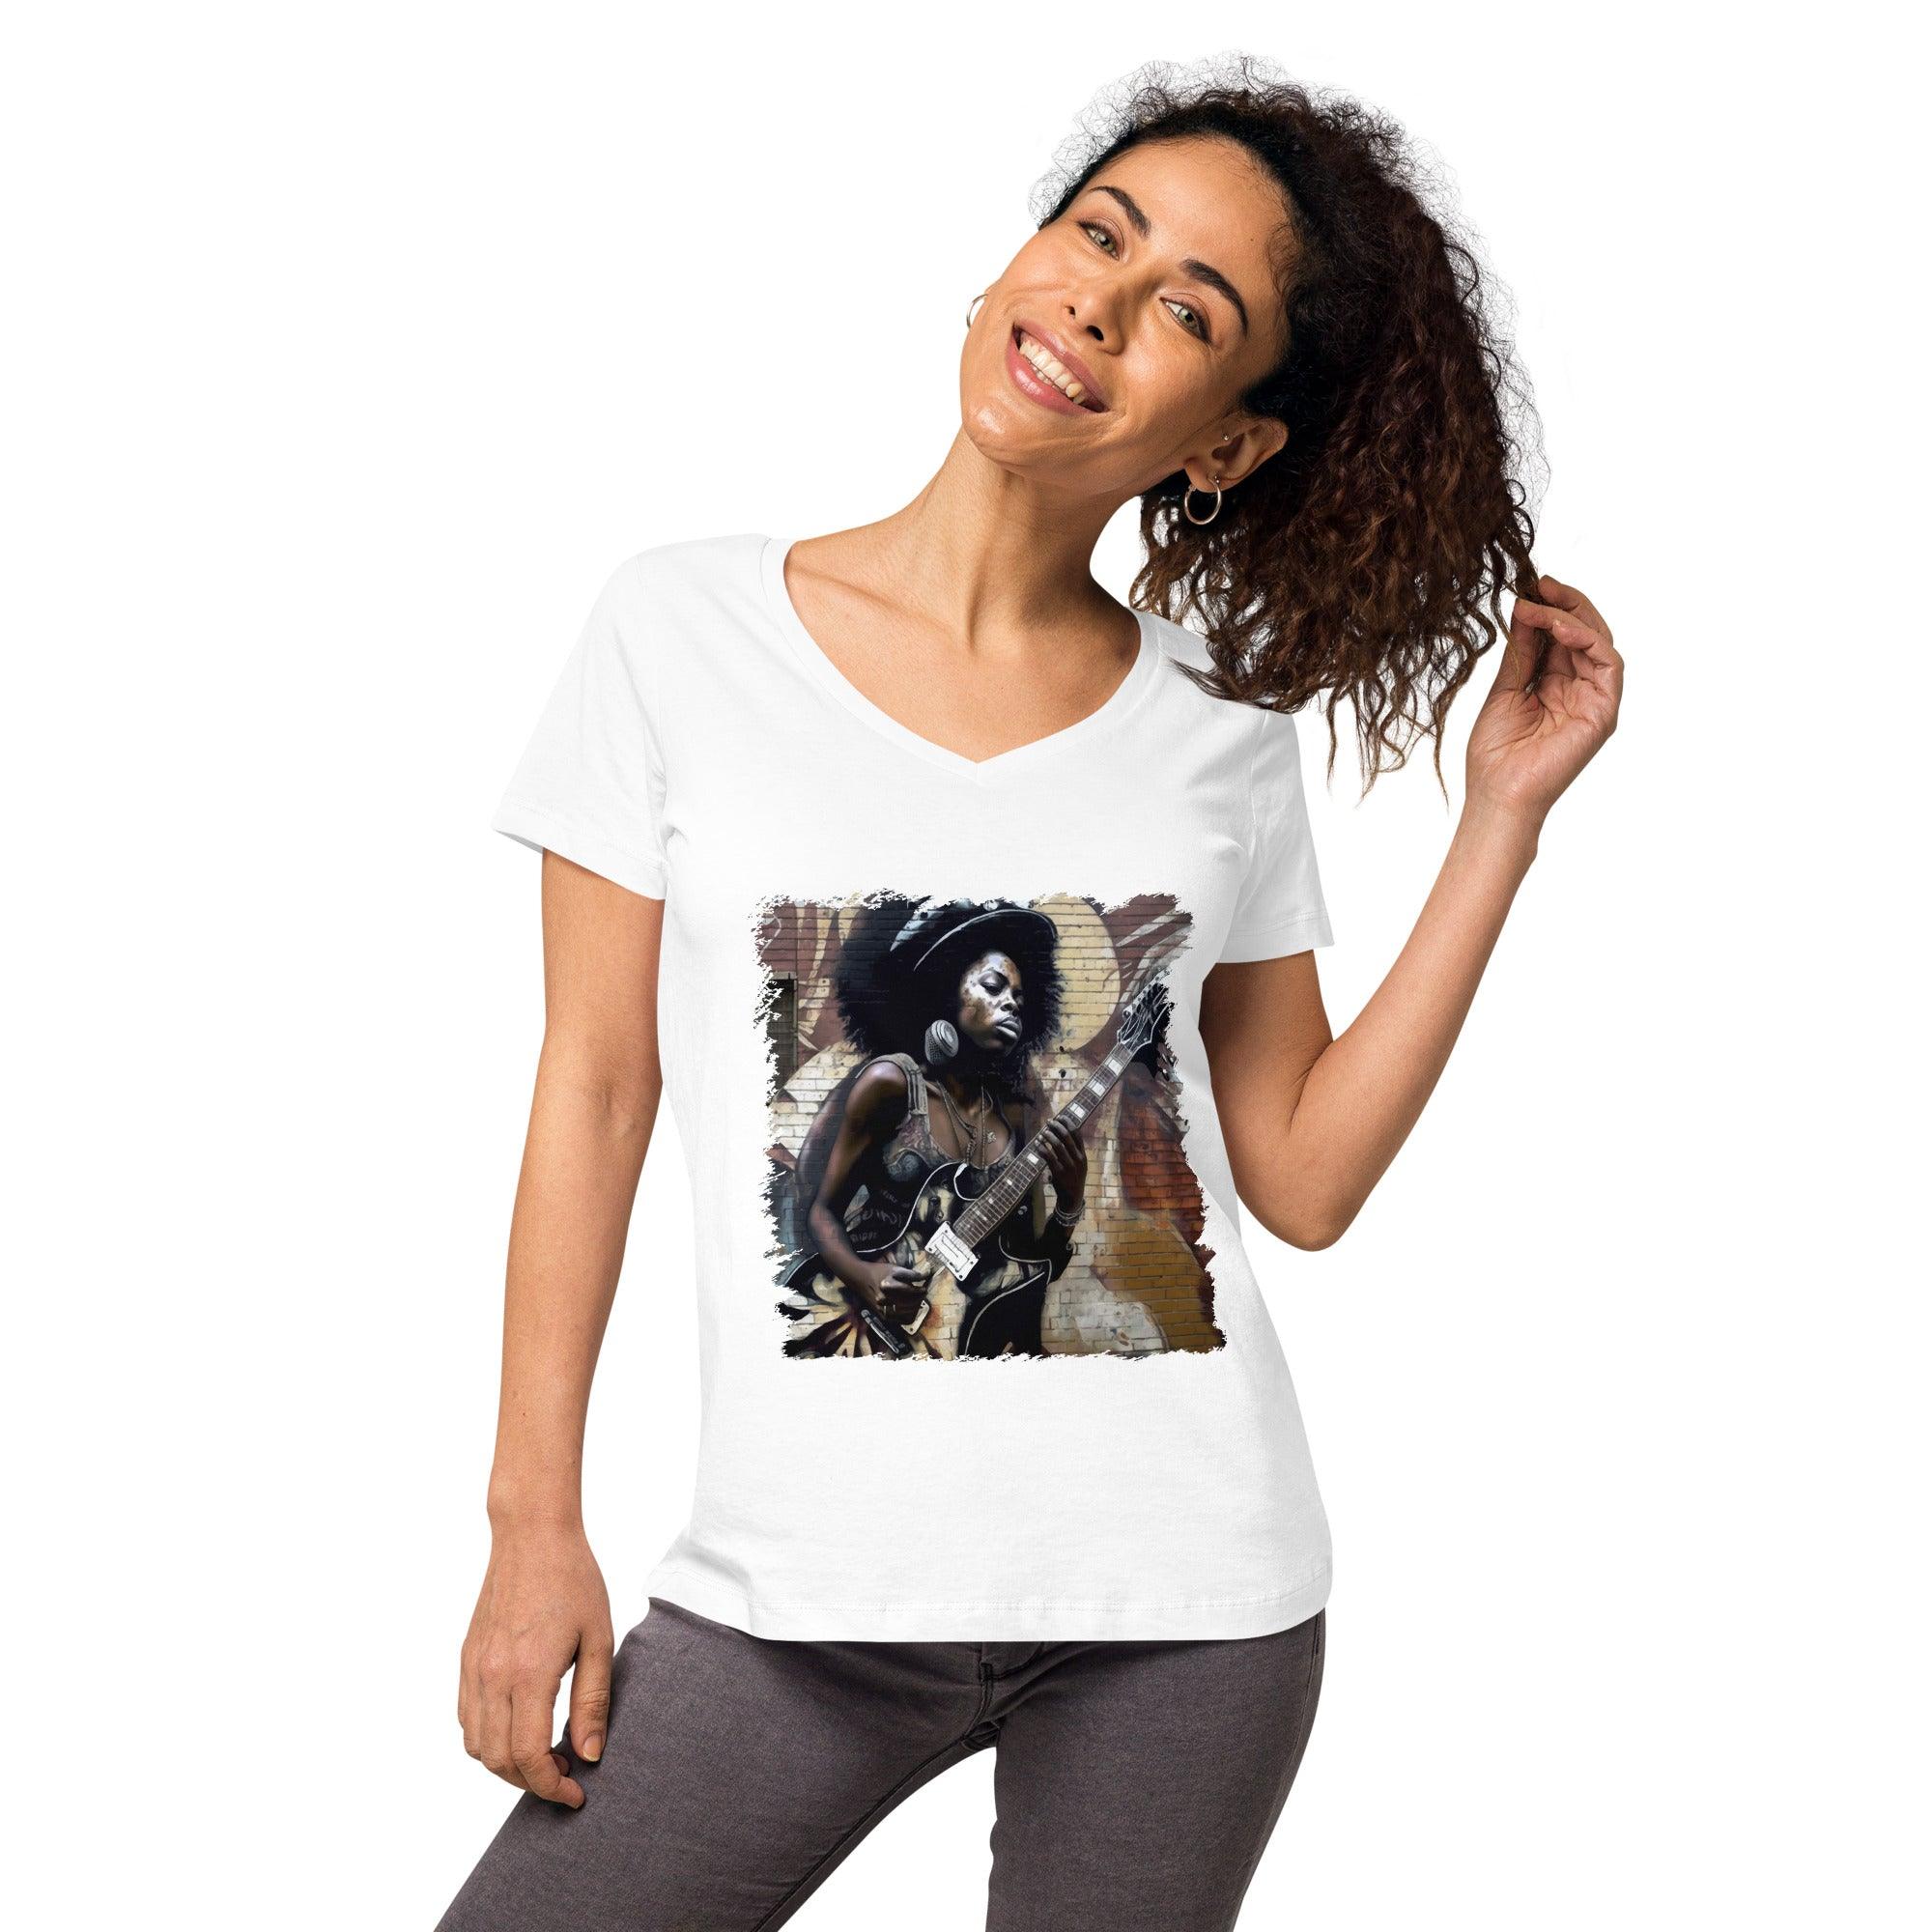 Strumming With Soul and Passion Women’s Fitted V-neck T-shirt - Beyond T-shirts